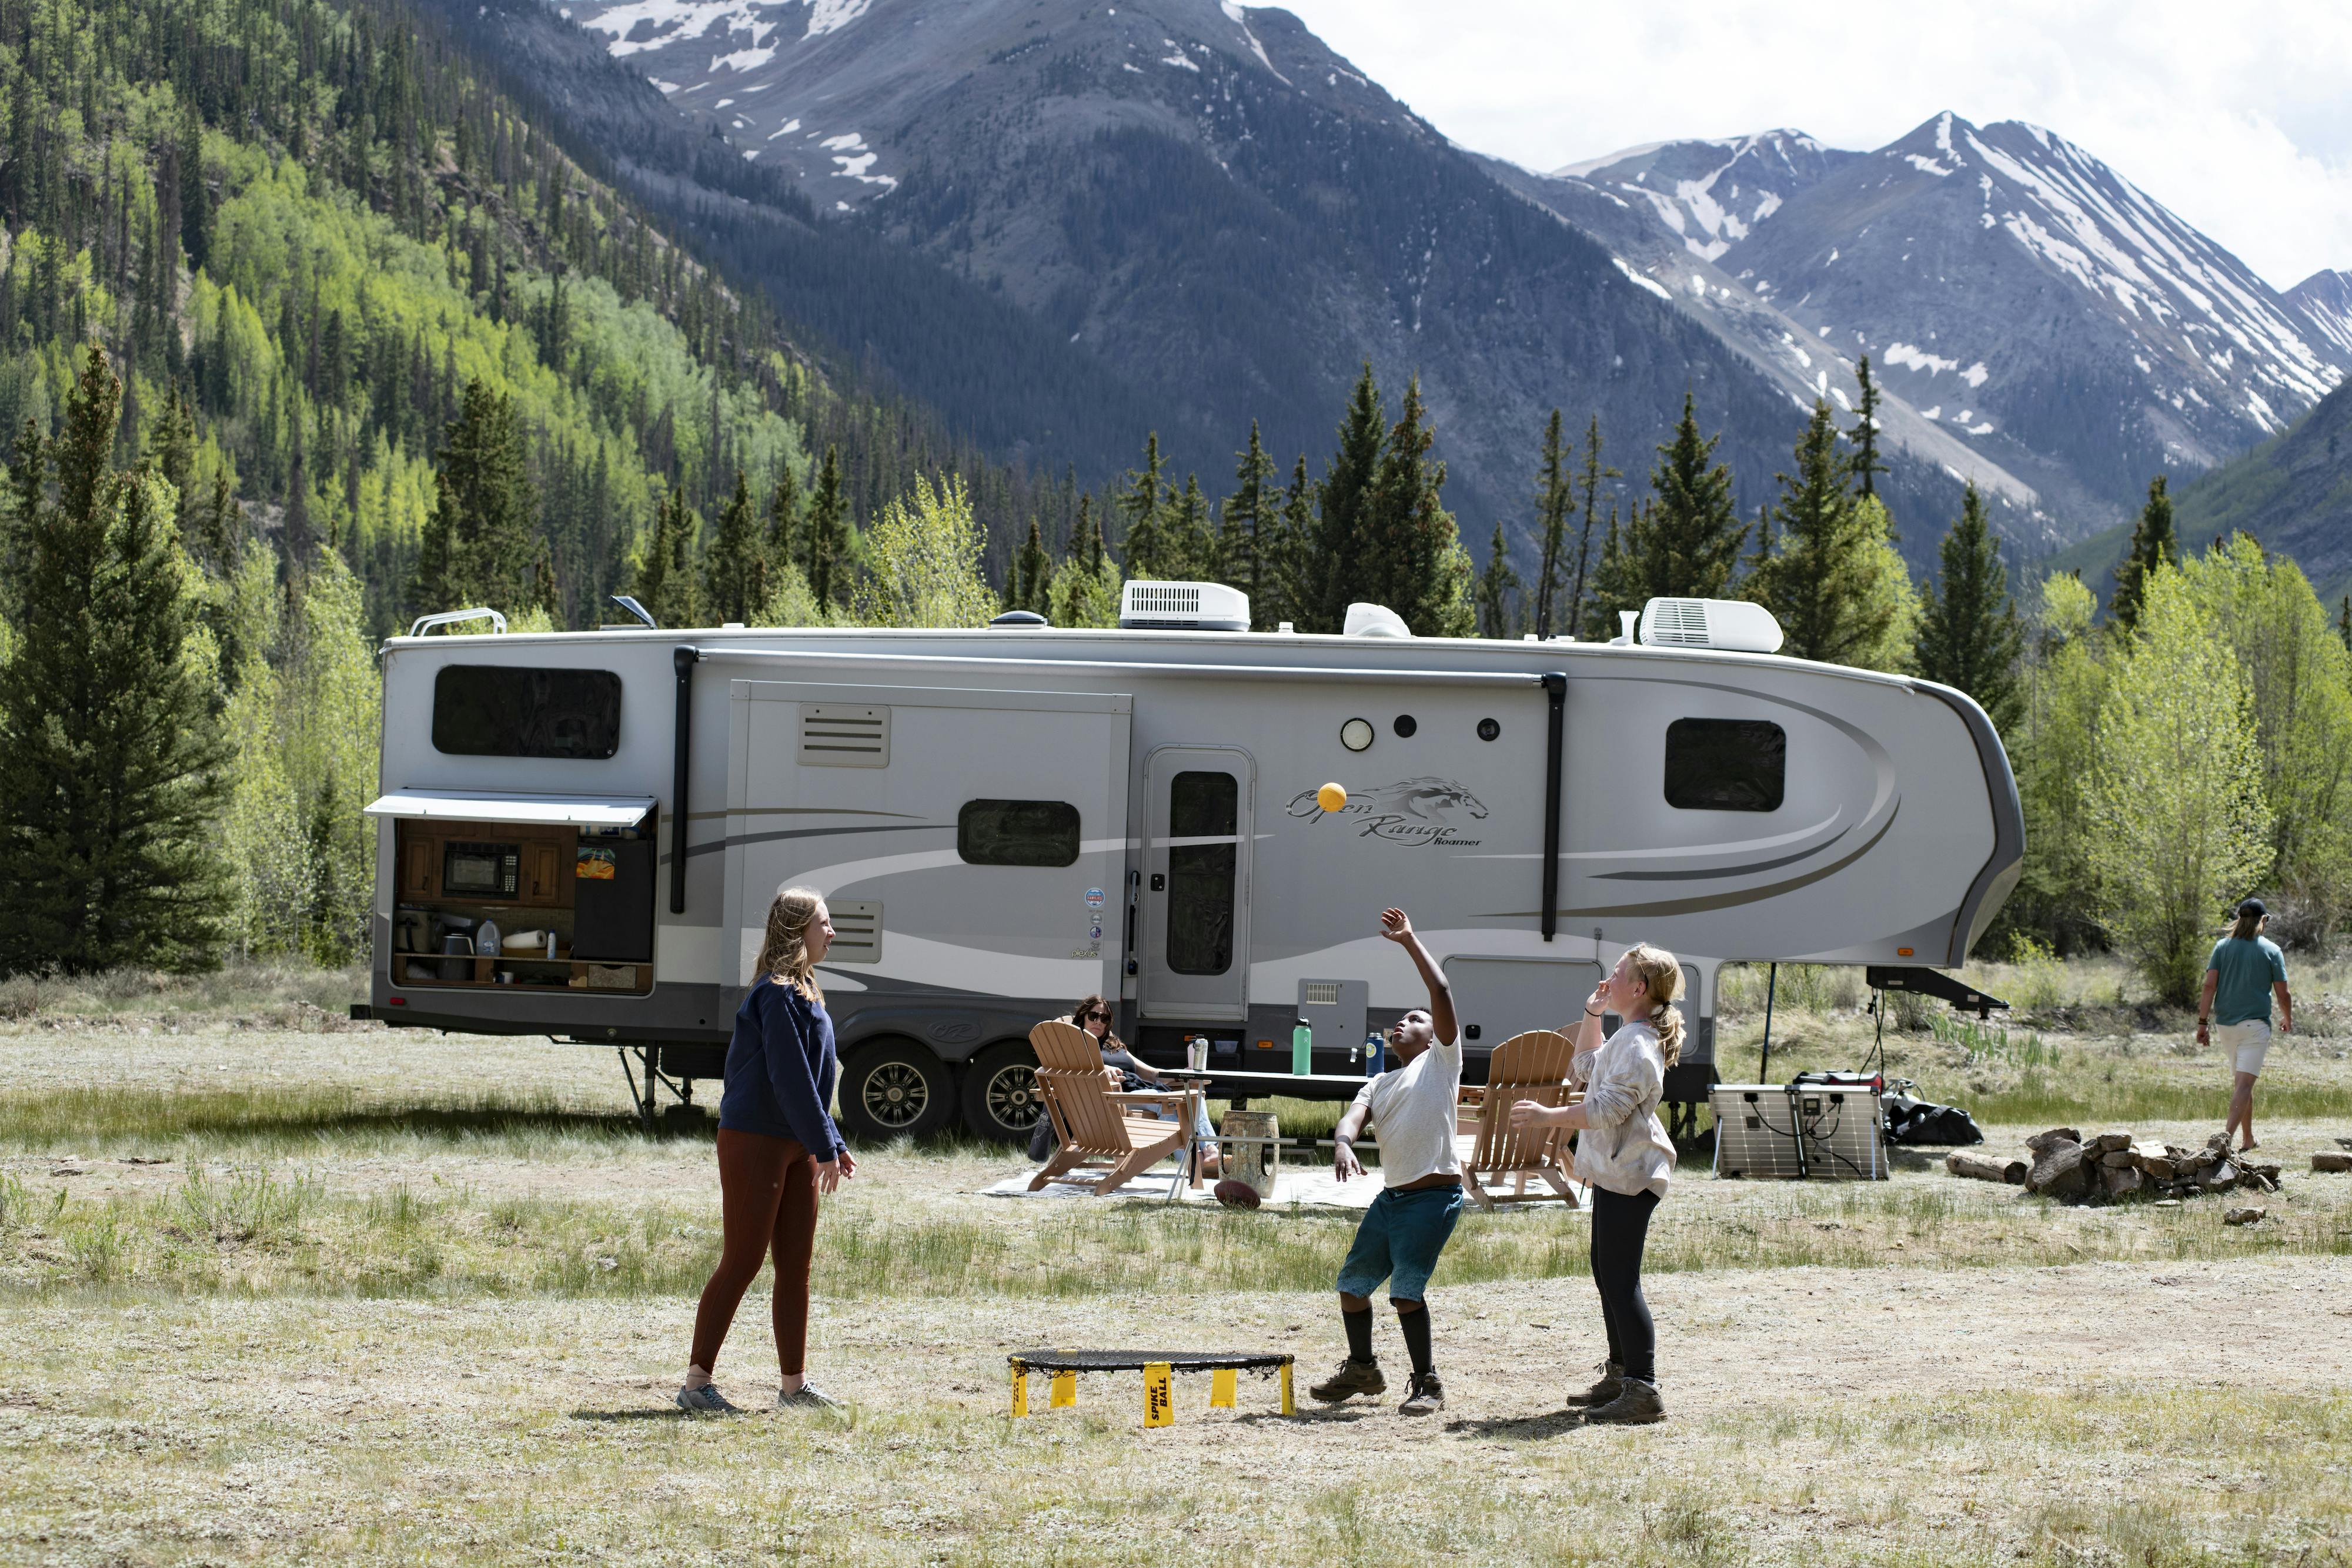 the Carew children playing a game in front of their RV